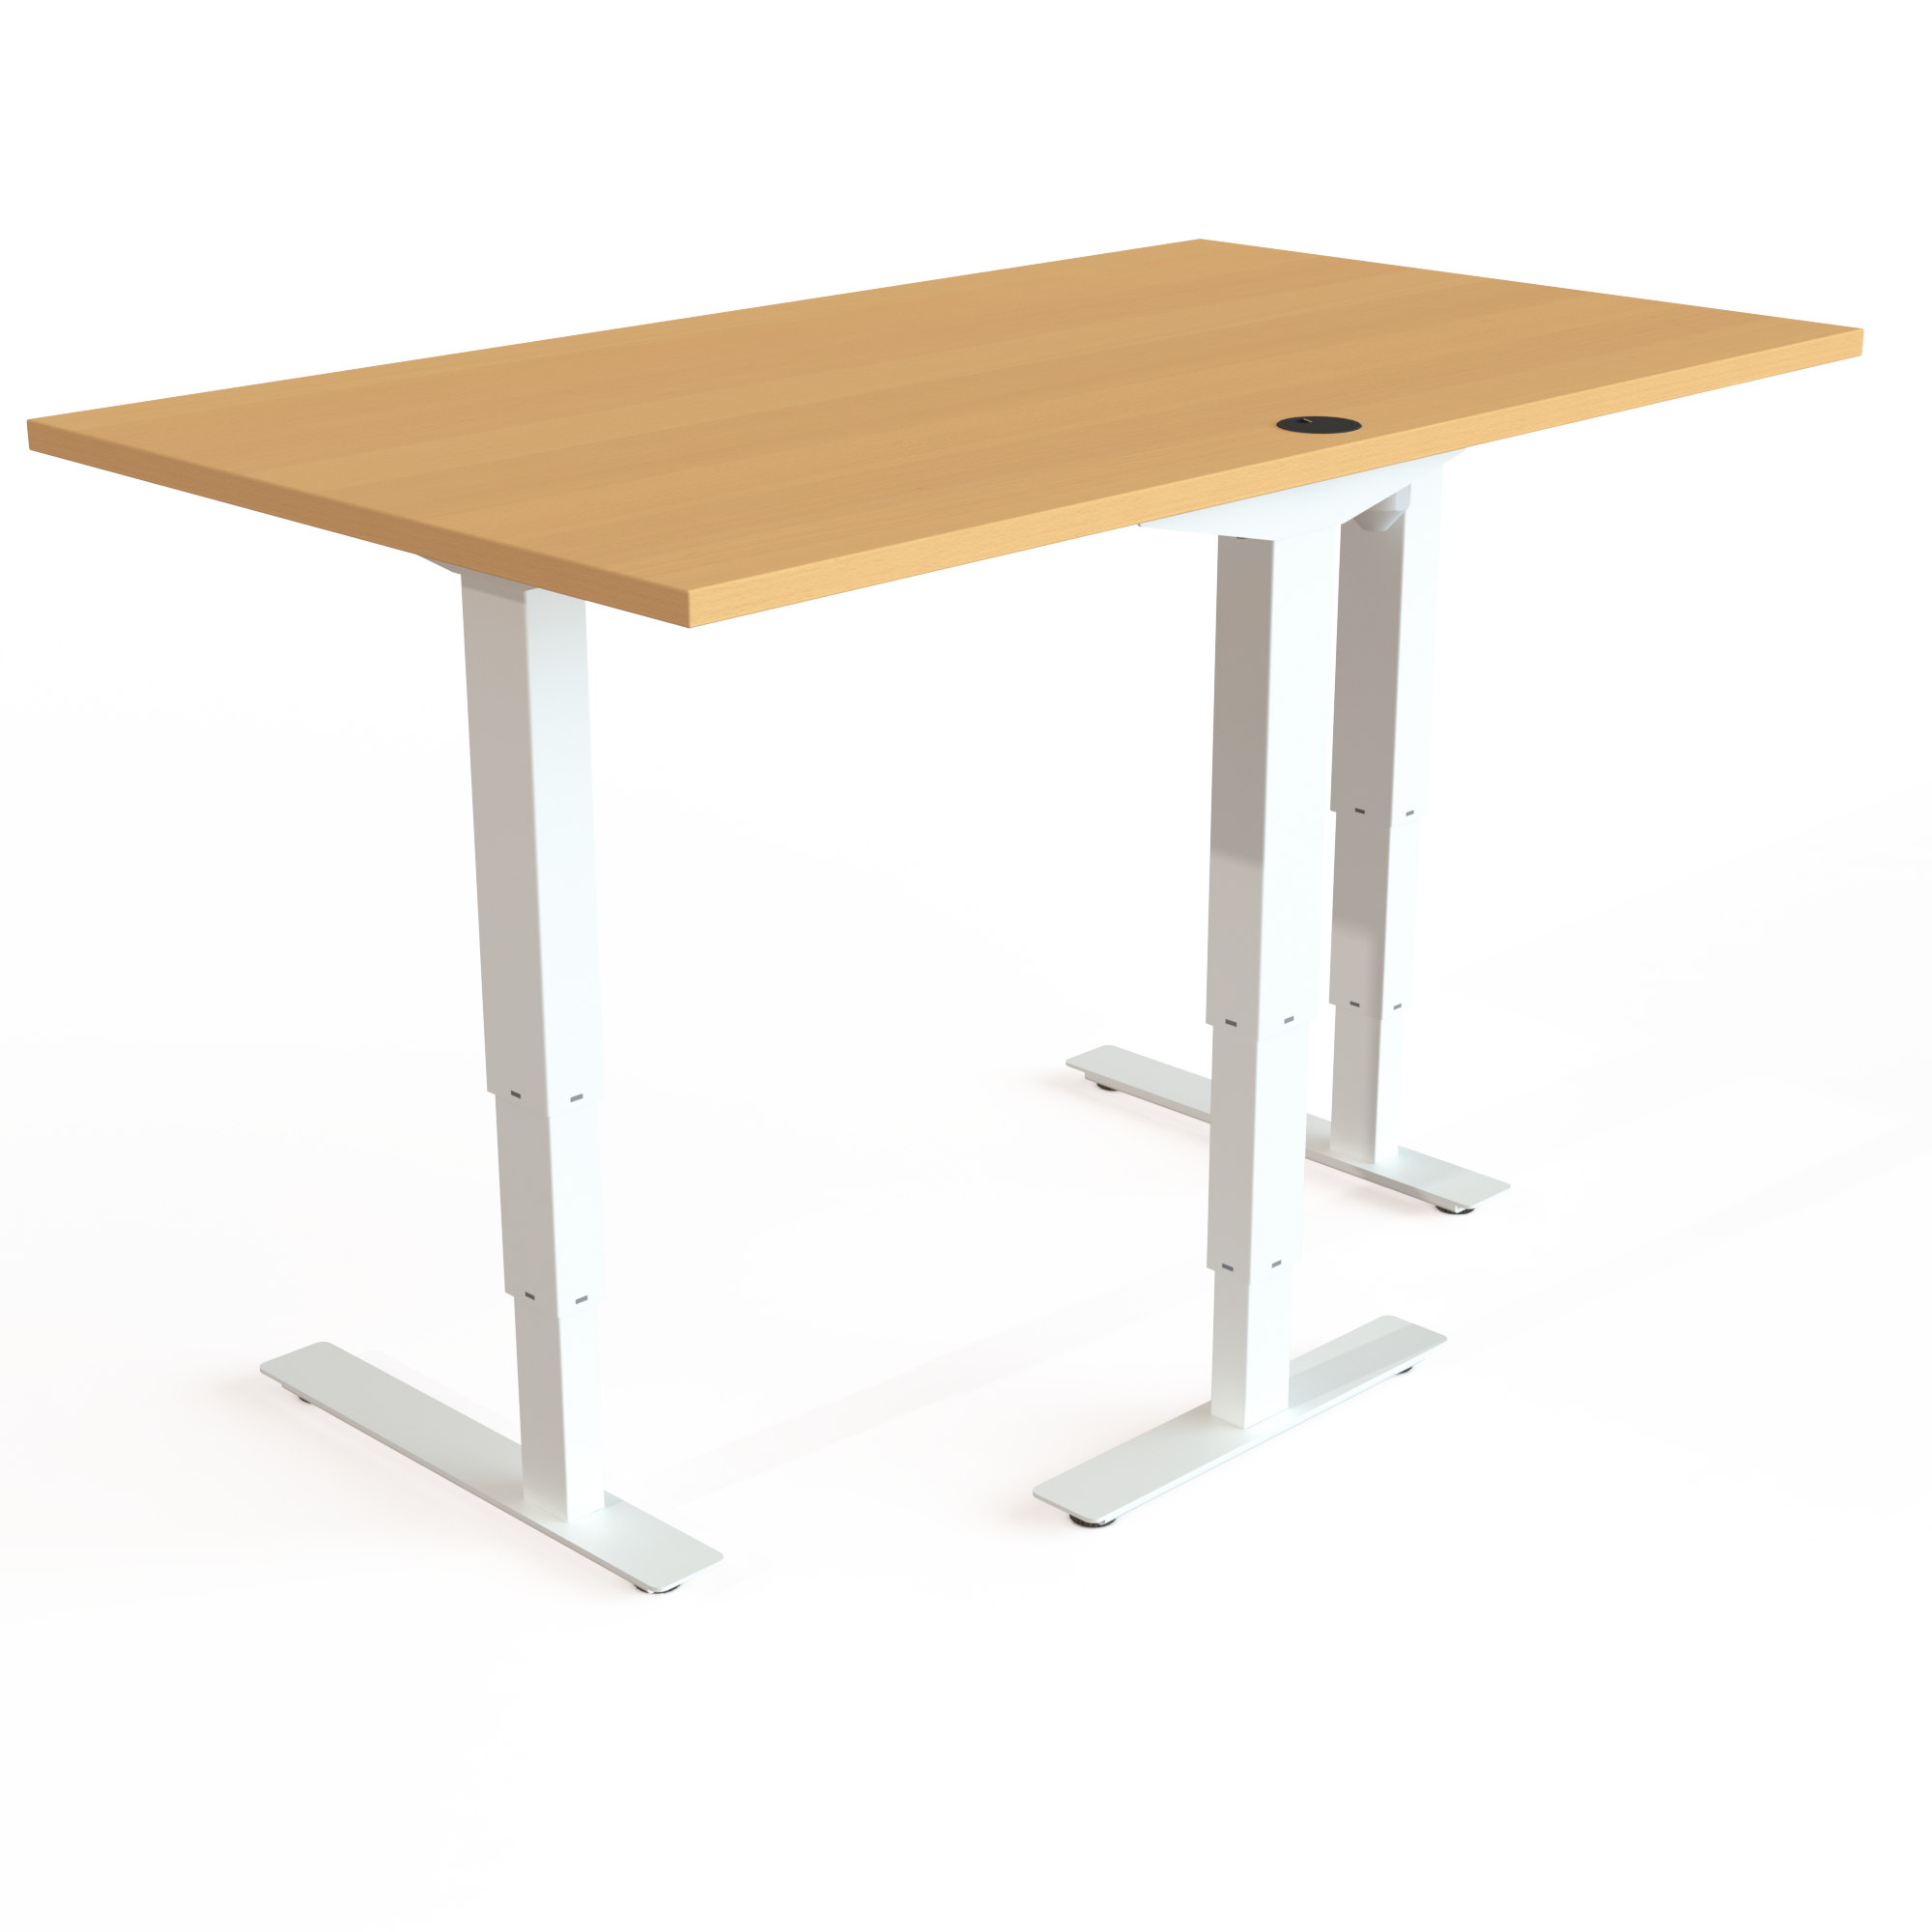 Electric Adjustable Desk | 140x80 cm | Beech with white frame